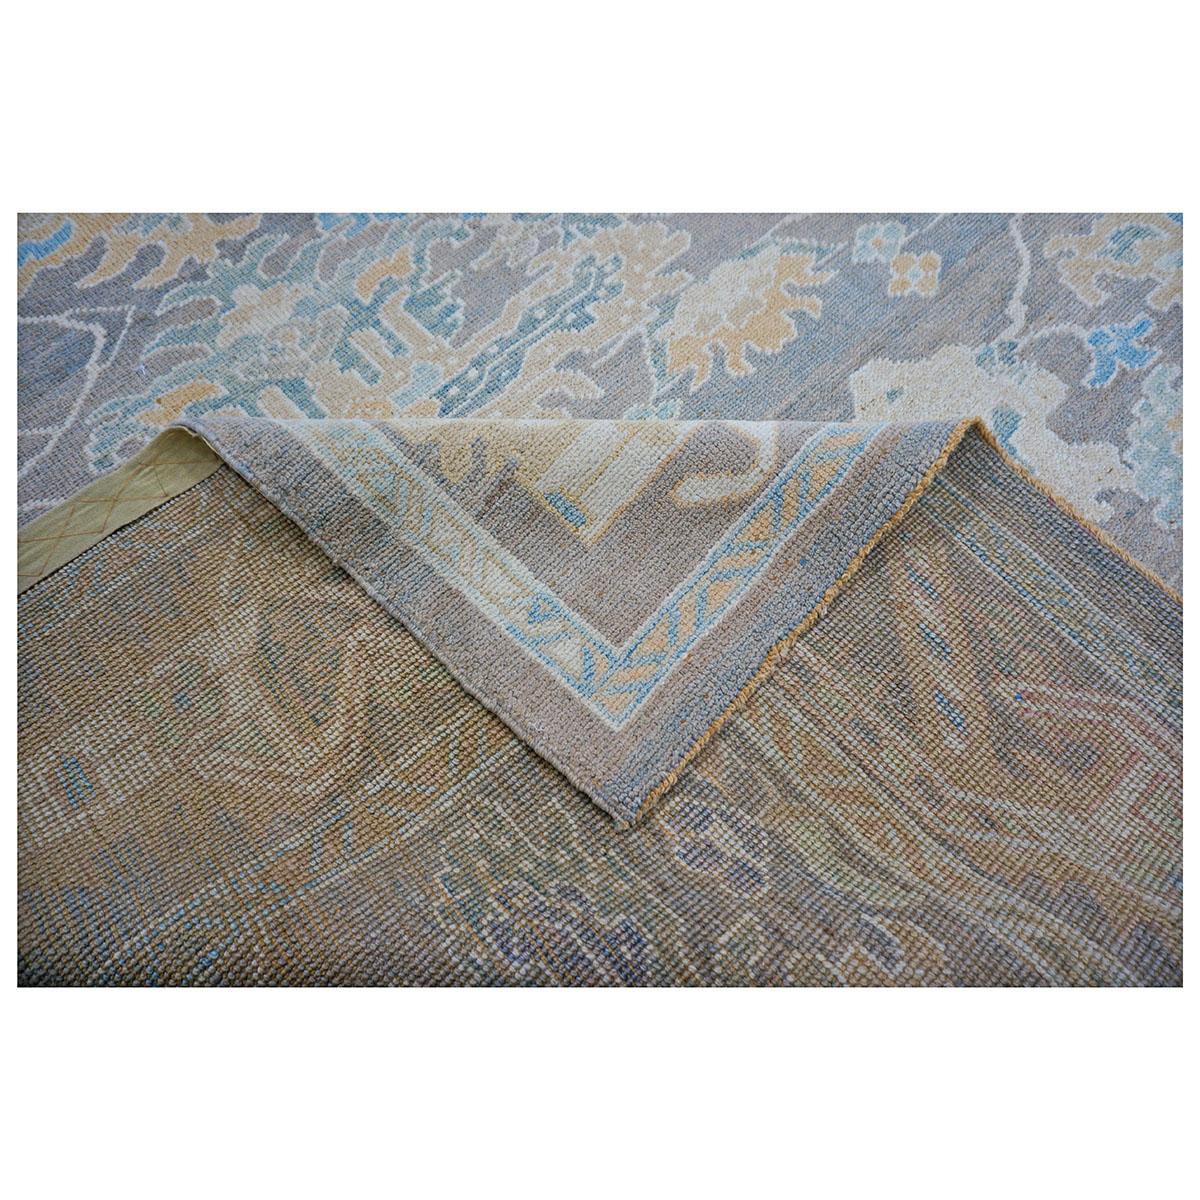 21st Century Turkish Donegal Carpet 12x12 Grey, Blue, and Gold Square Area Rug In Good Condition For Sale In Houston, TX